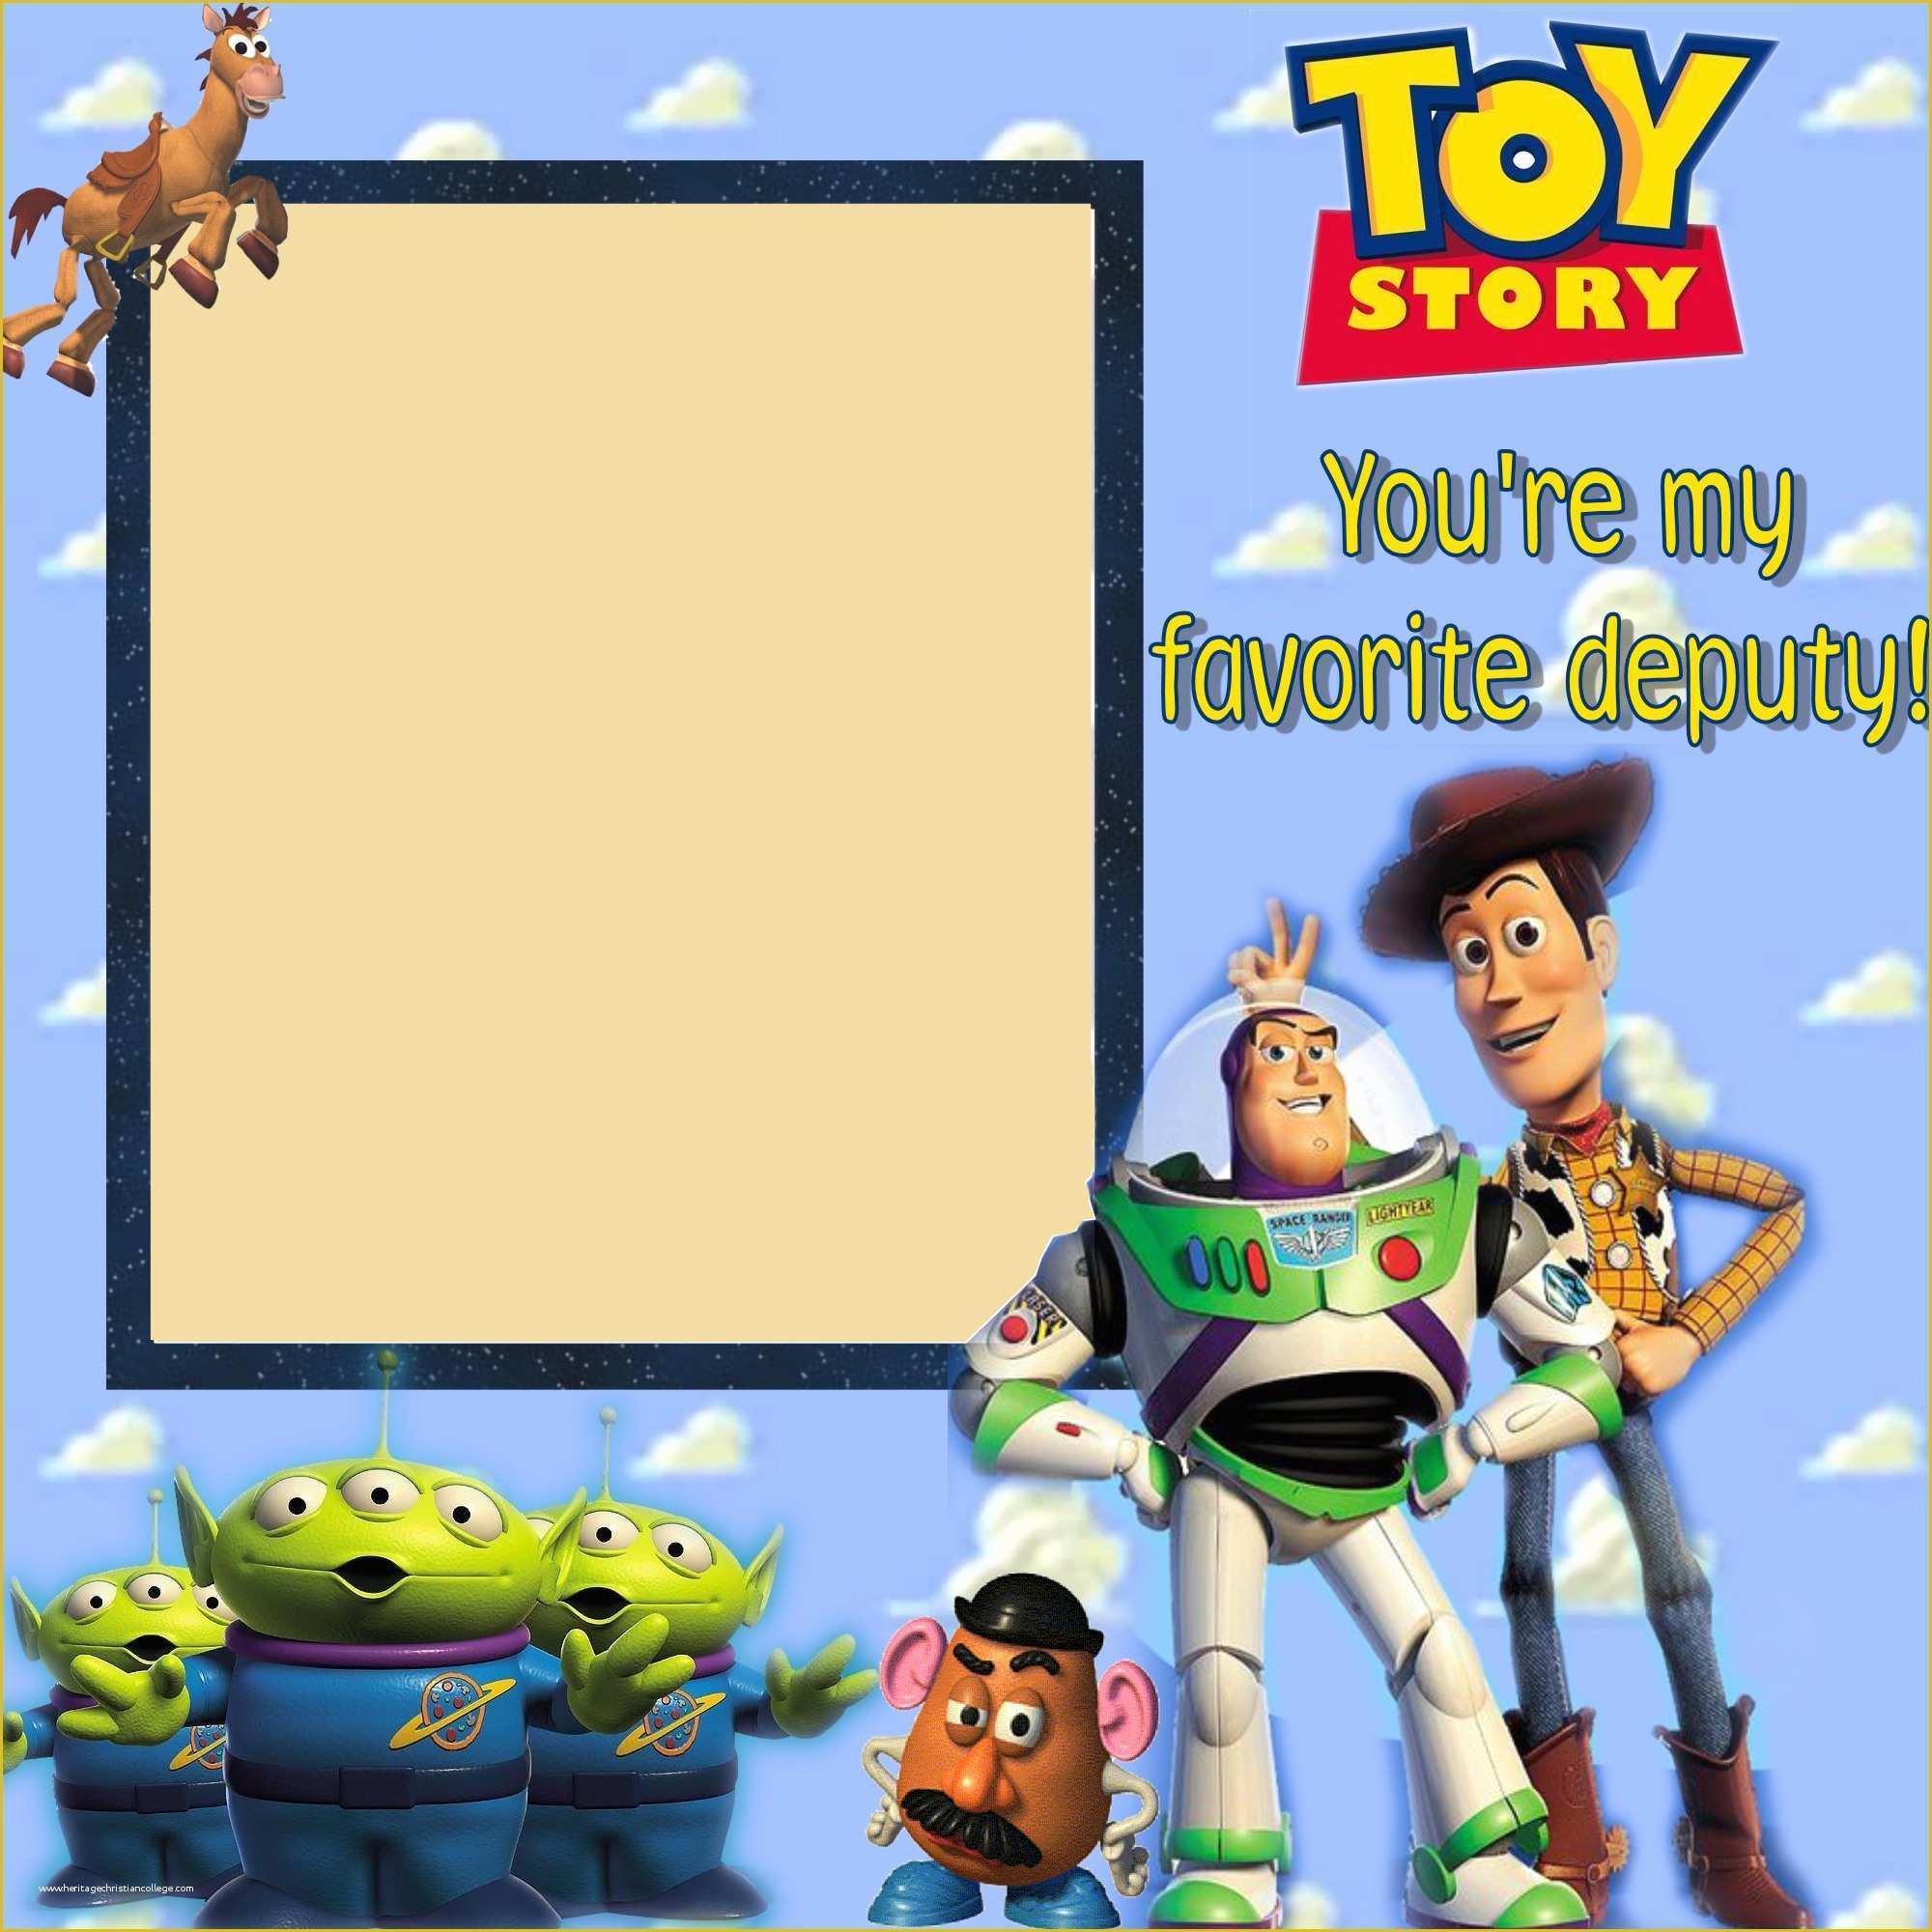 Toy Story Invitation Template Free Download Of toy Story